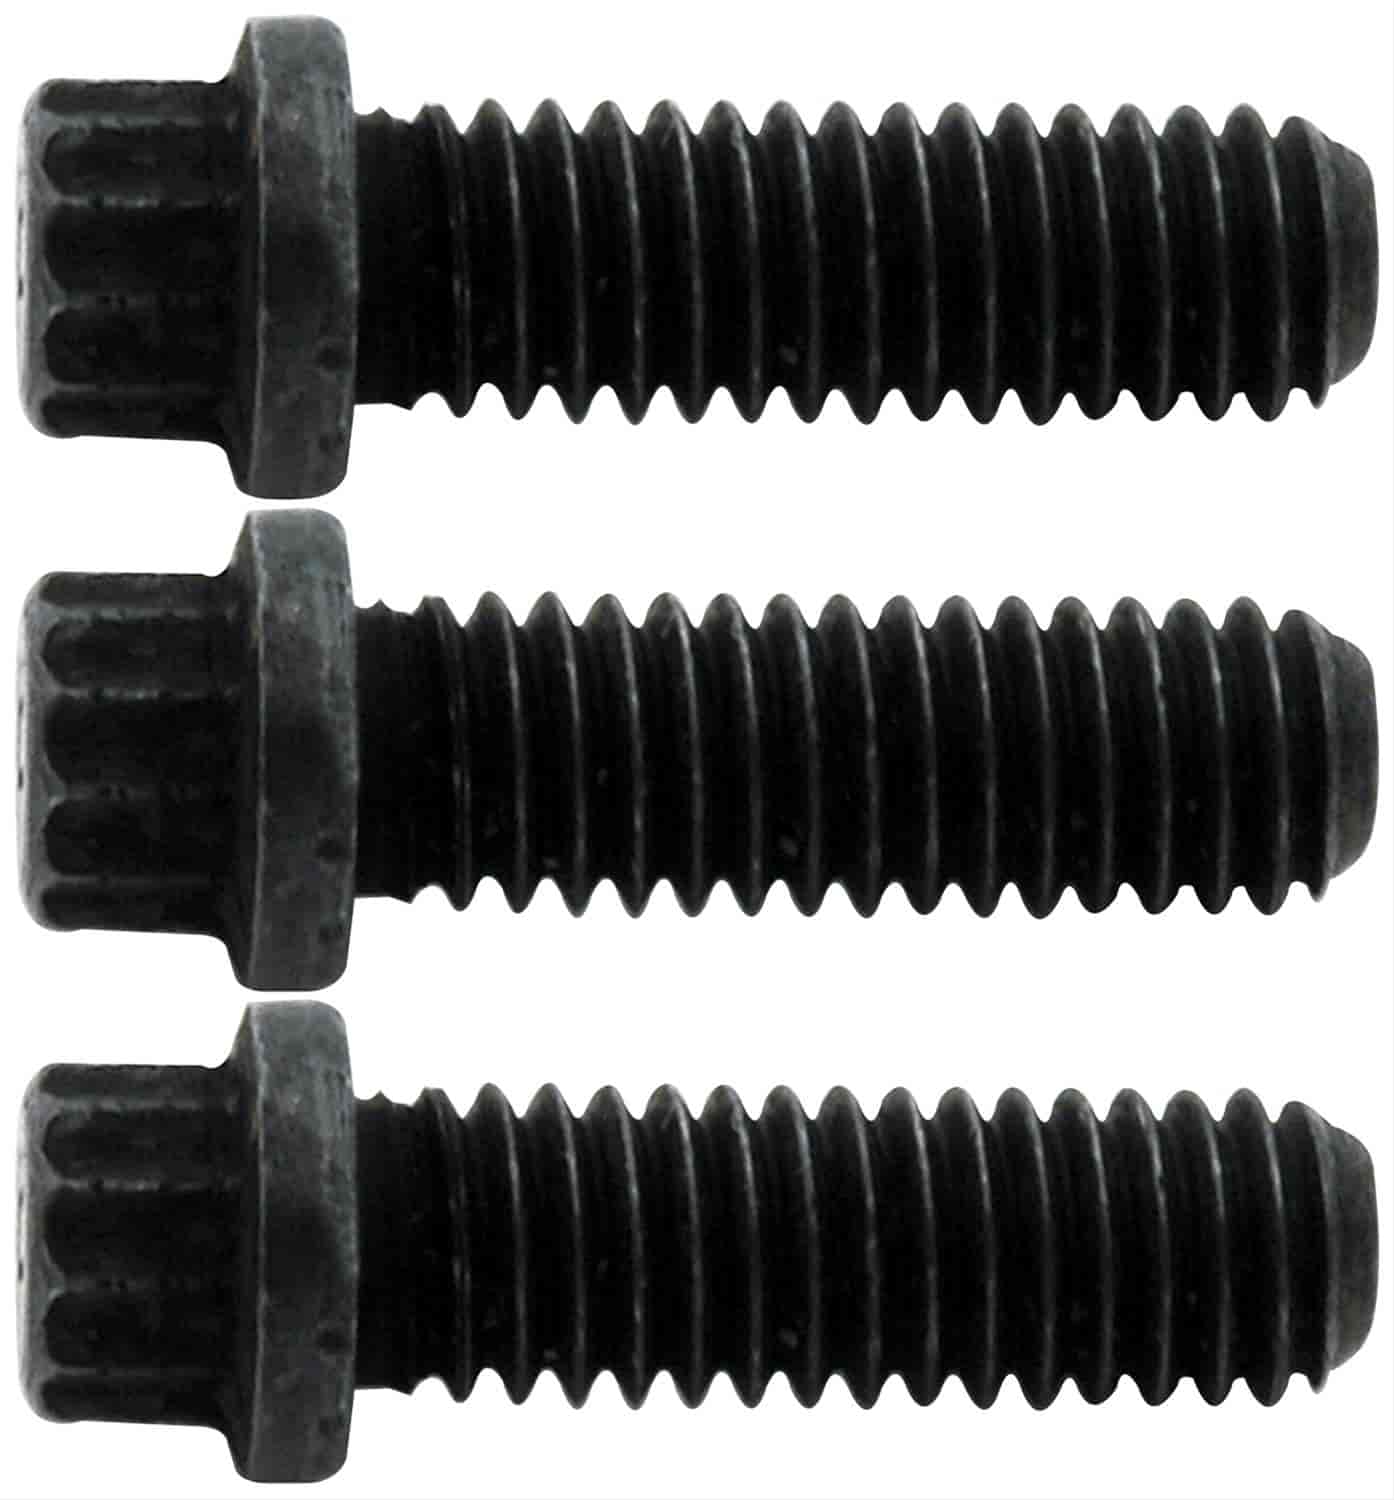 Replacement Mandrel Bolts 5/16"-18 x 1"